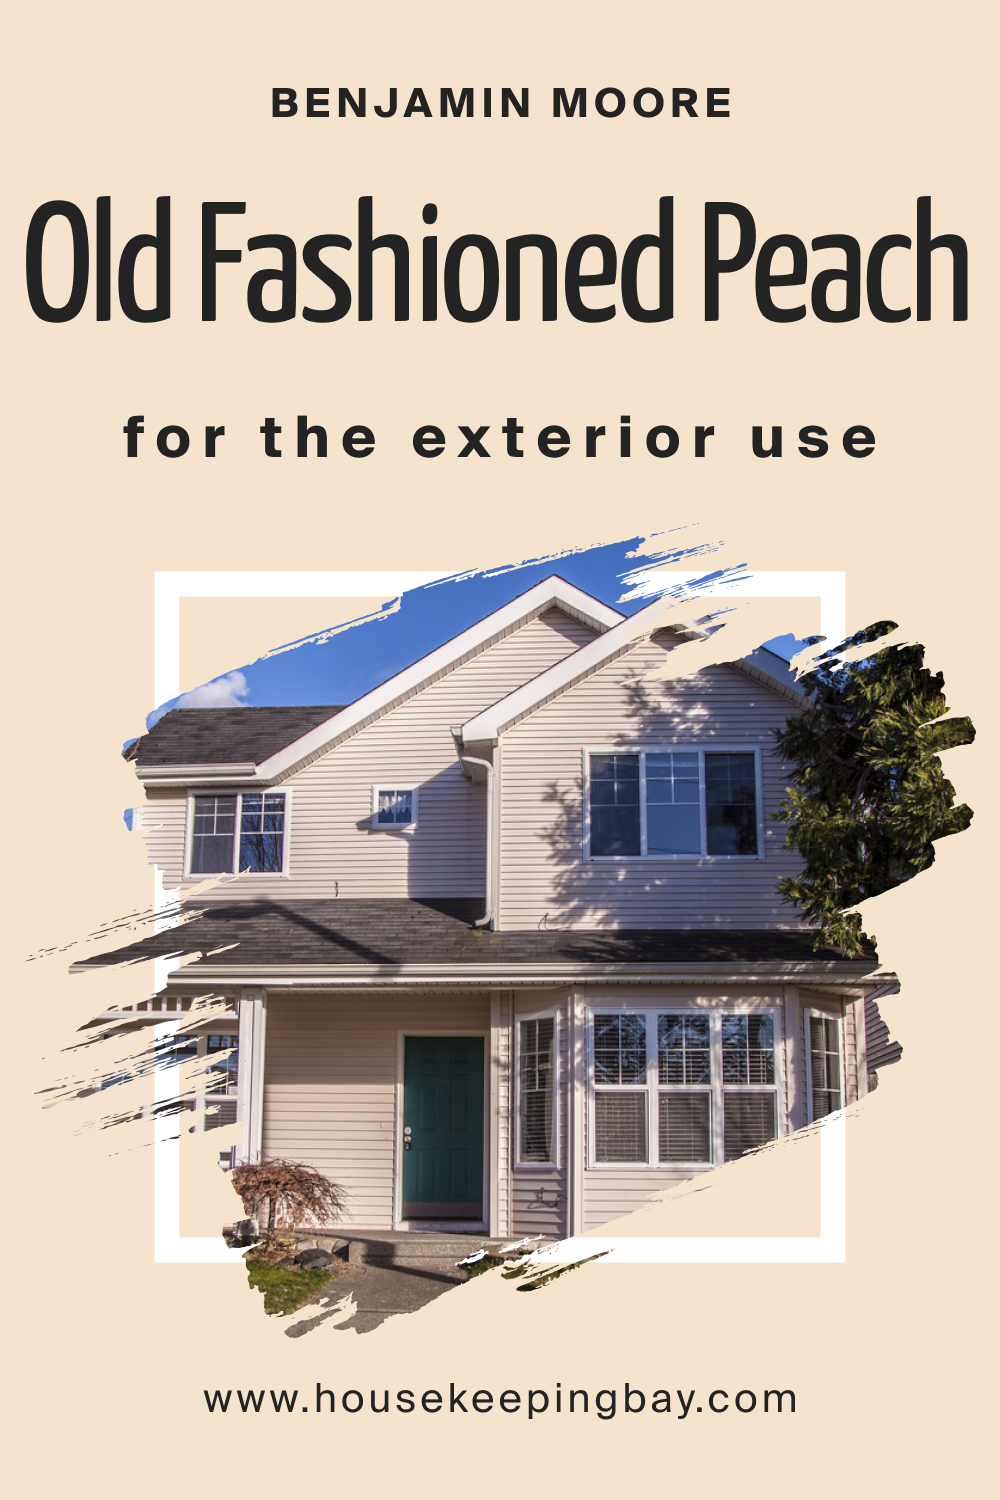 Benjamin Moore. Old Fashioned Peach OC 79 for the Exterior Use